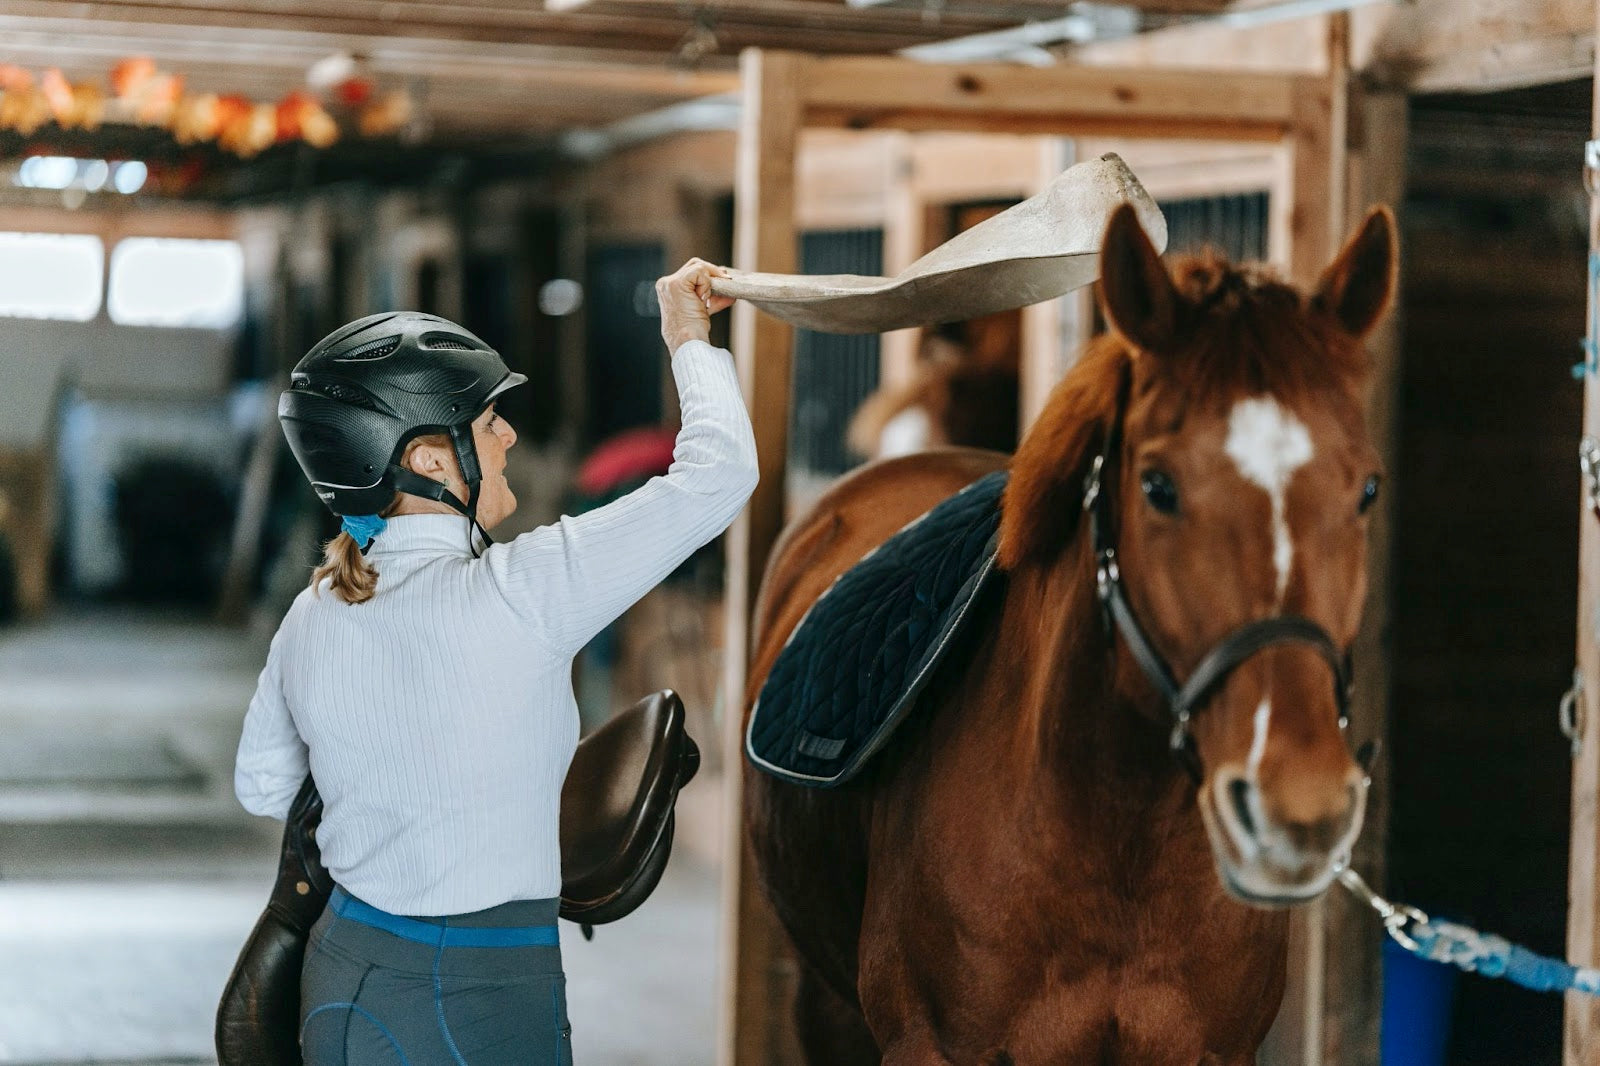 Magnetic Therapy to Aid Post-Ride Recovery after Horseback Riding